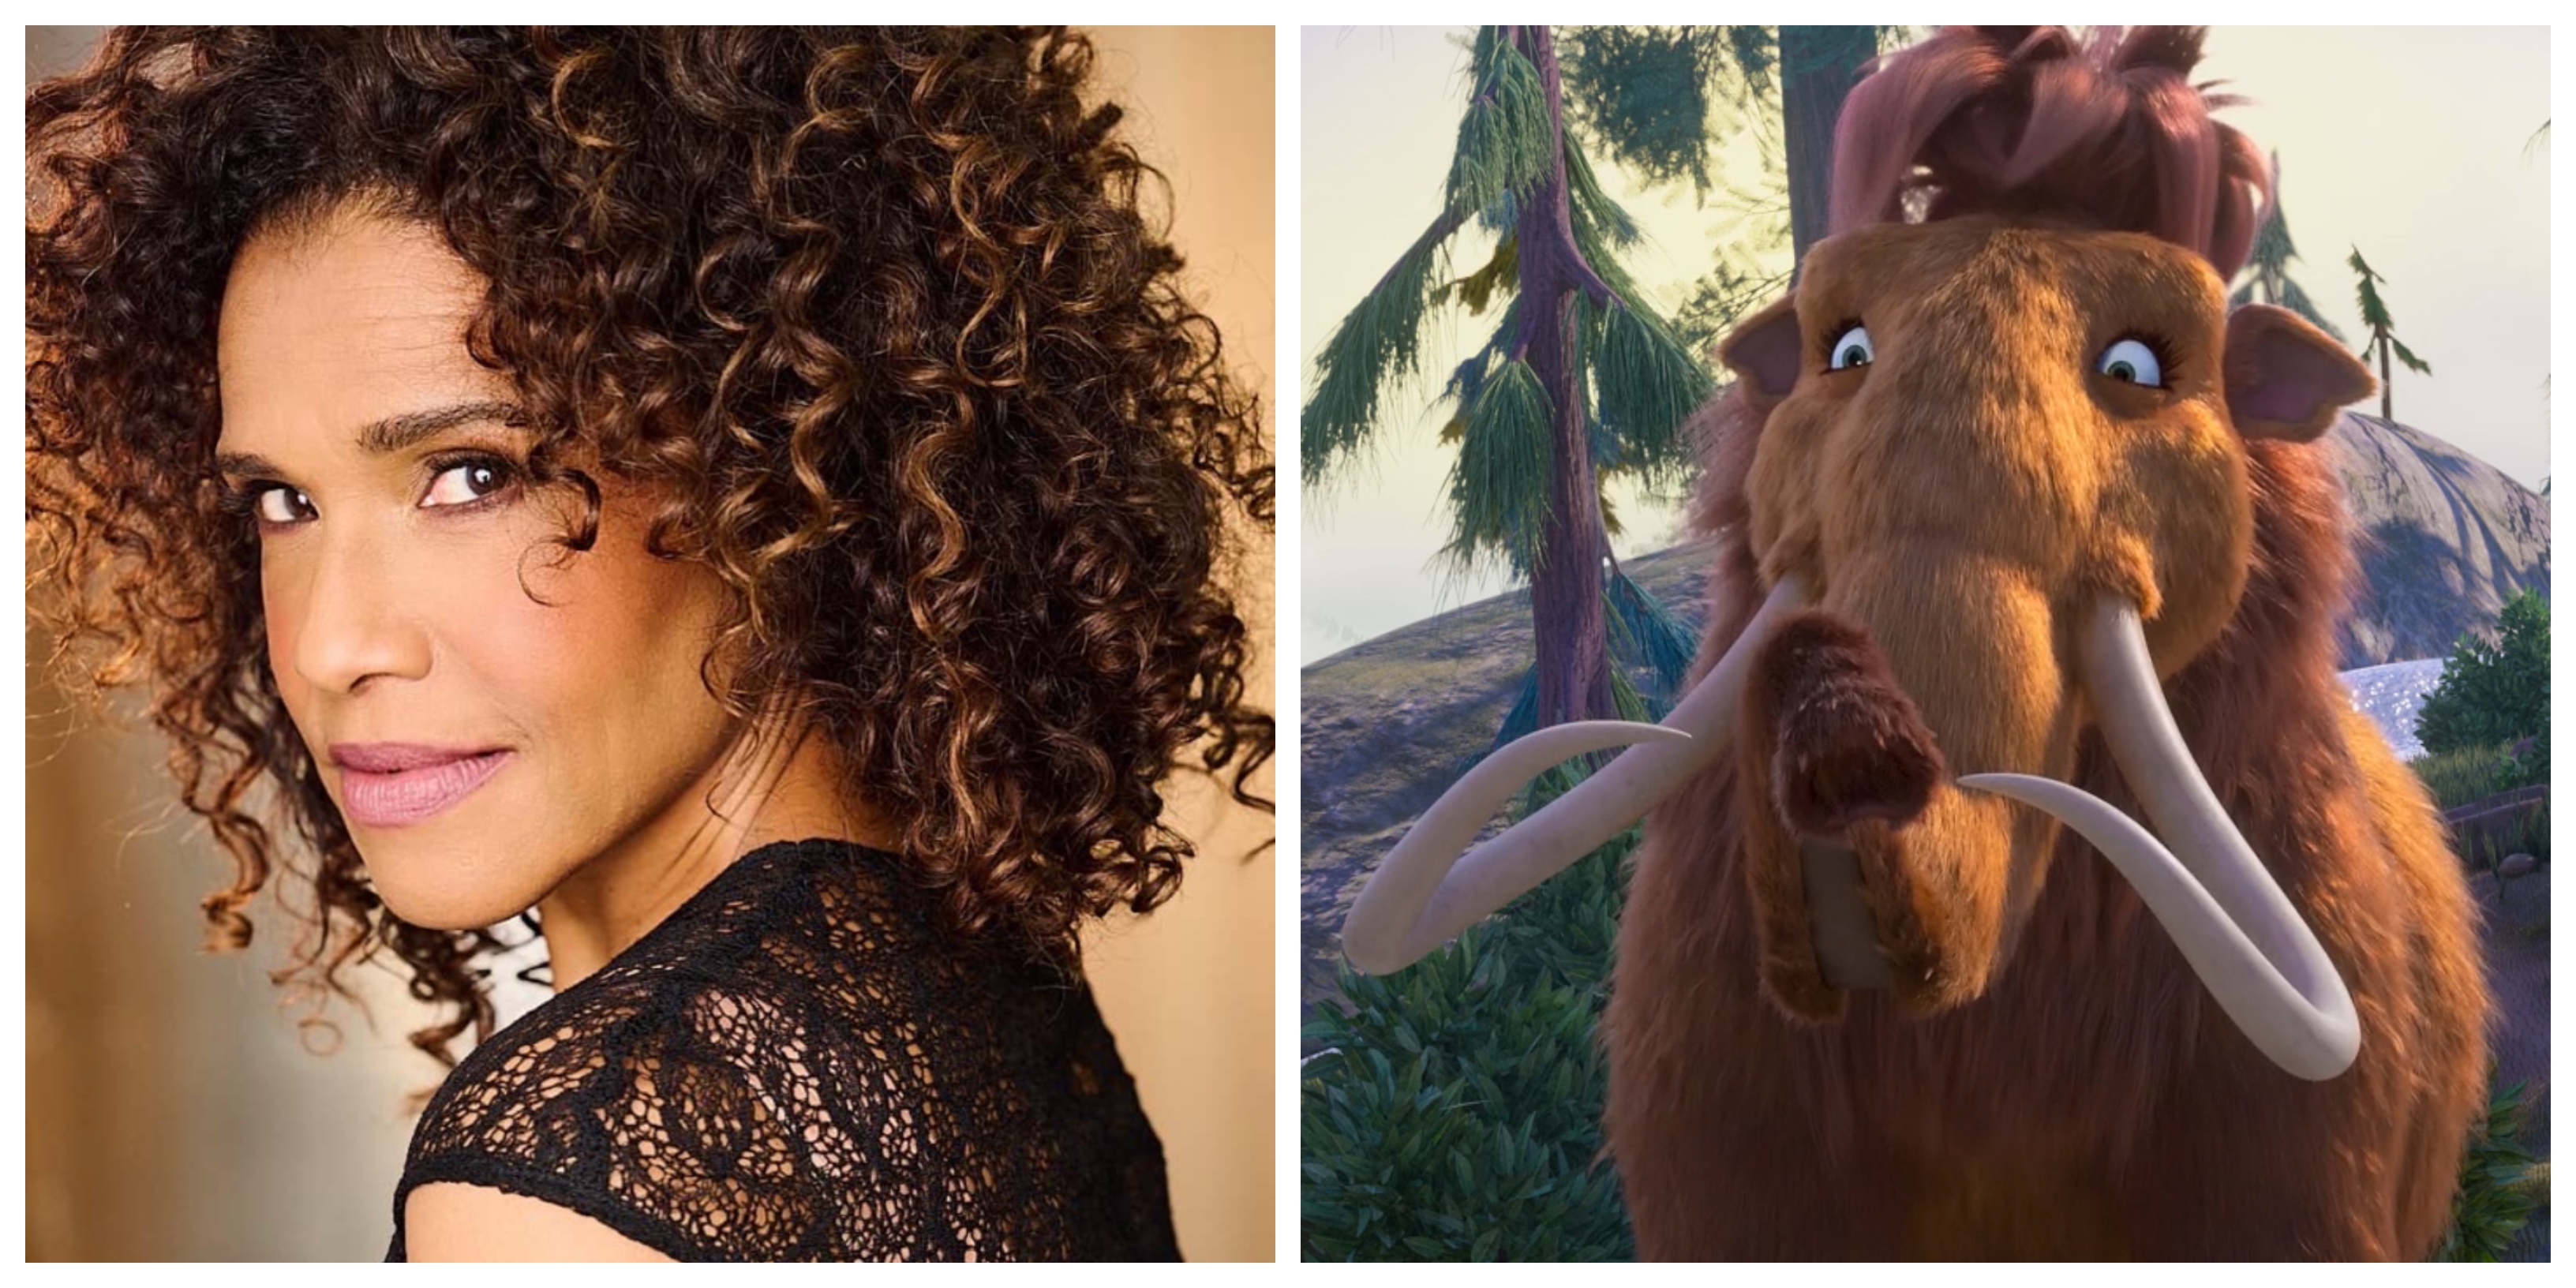 The Ice Age Adventures of Buck Wild Voice Cast - Dominique Jennings as Ellie